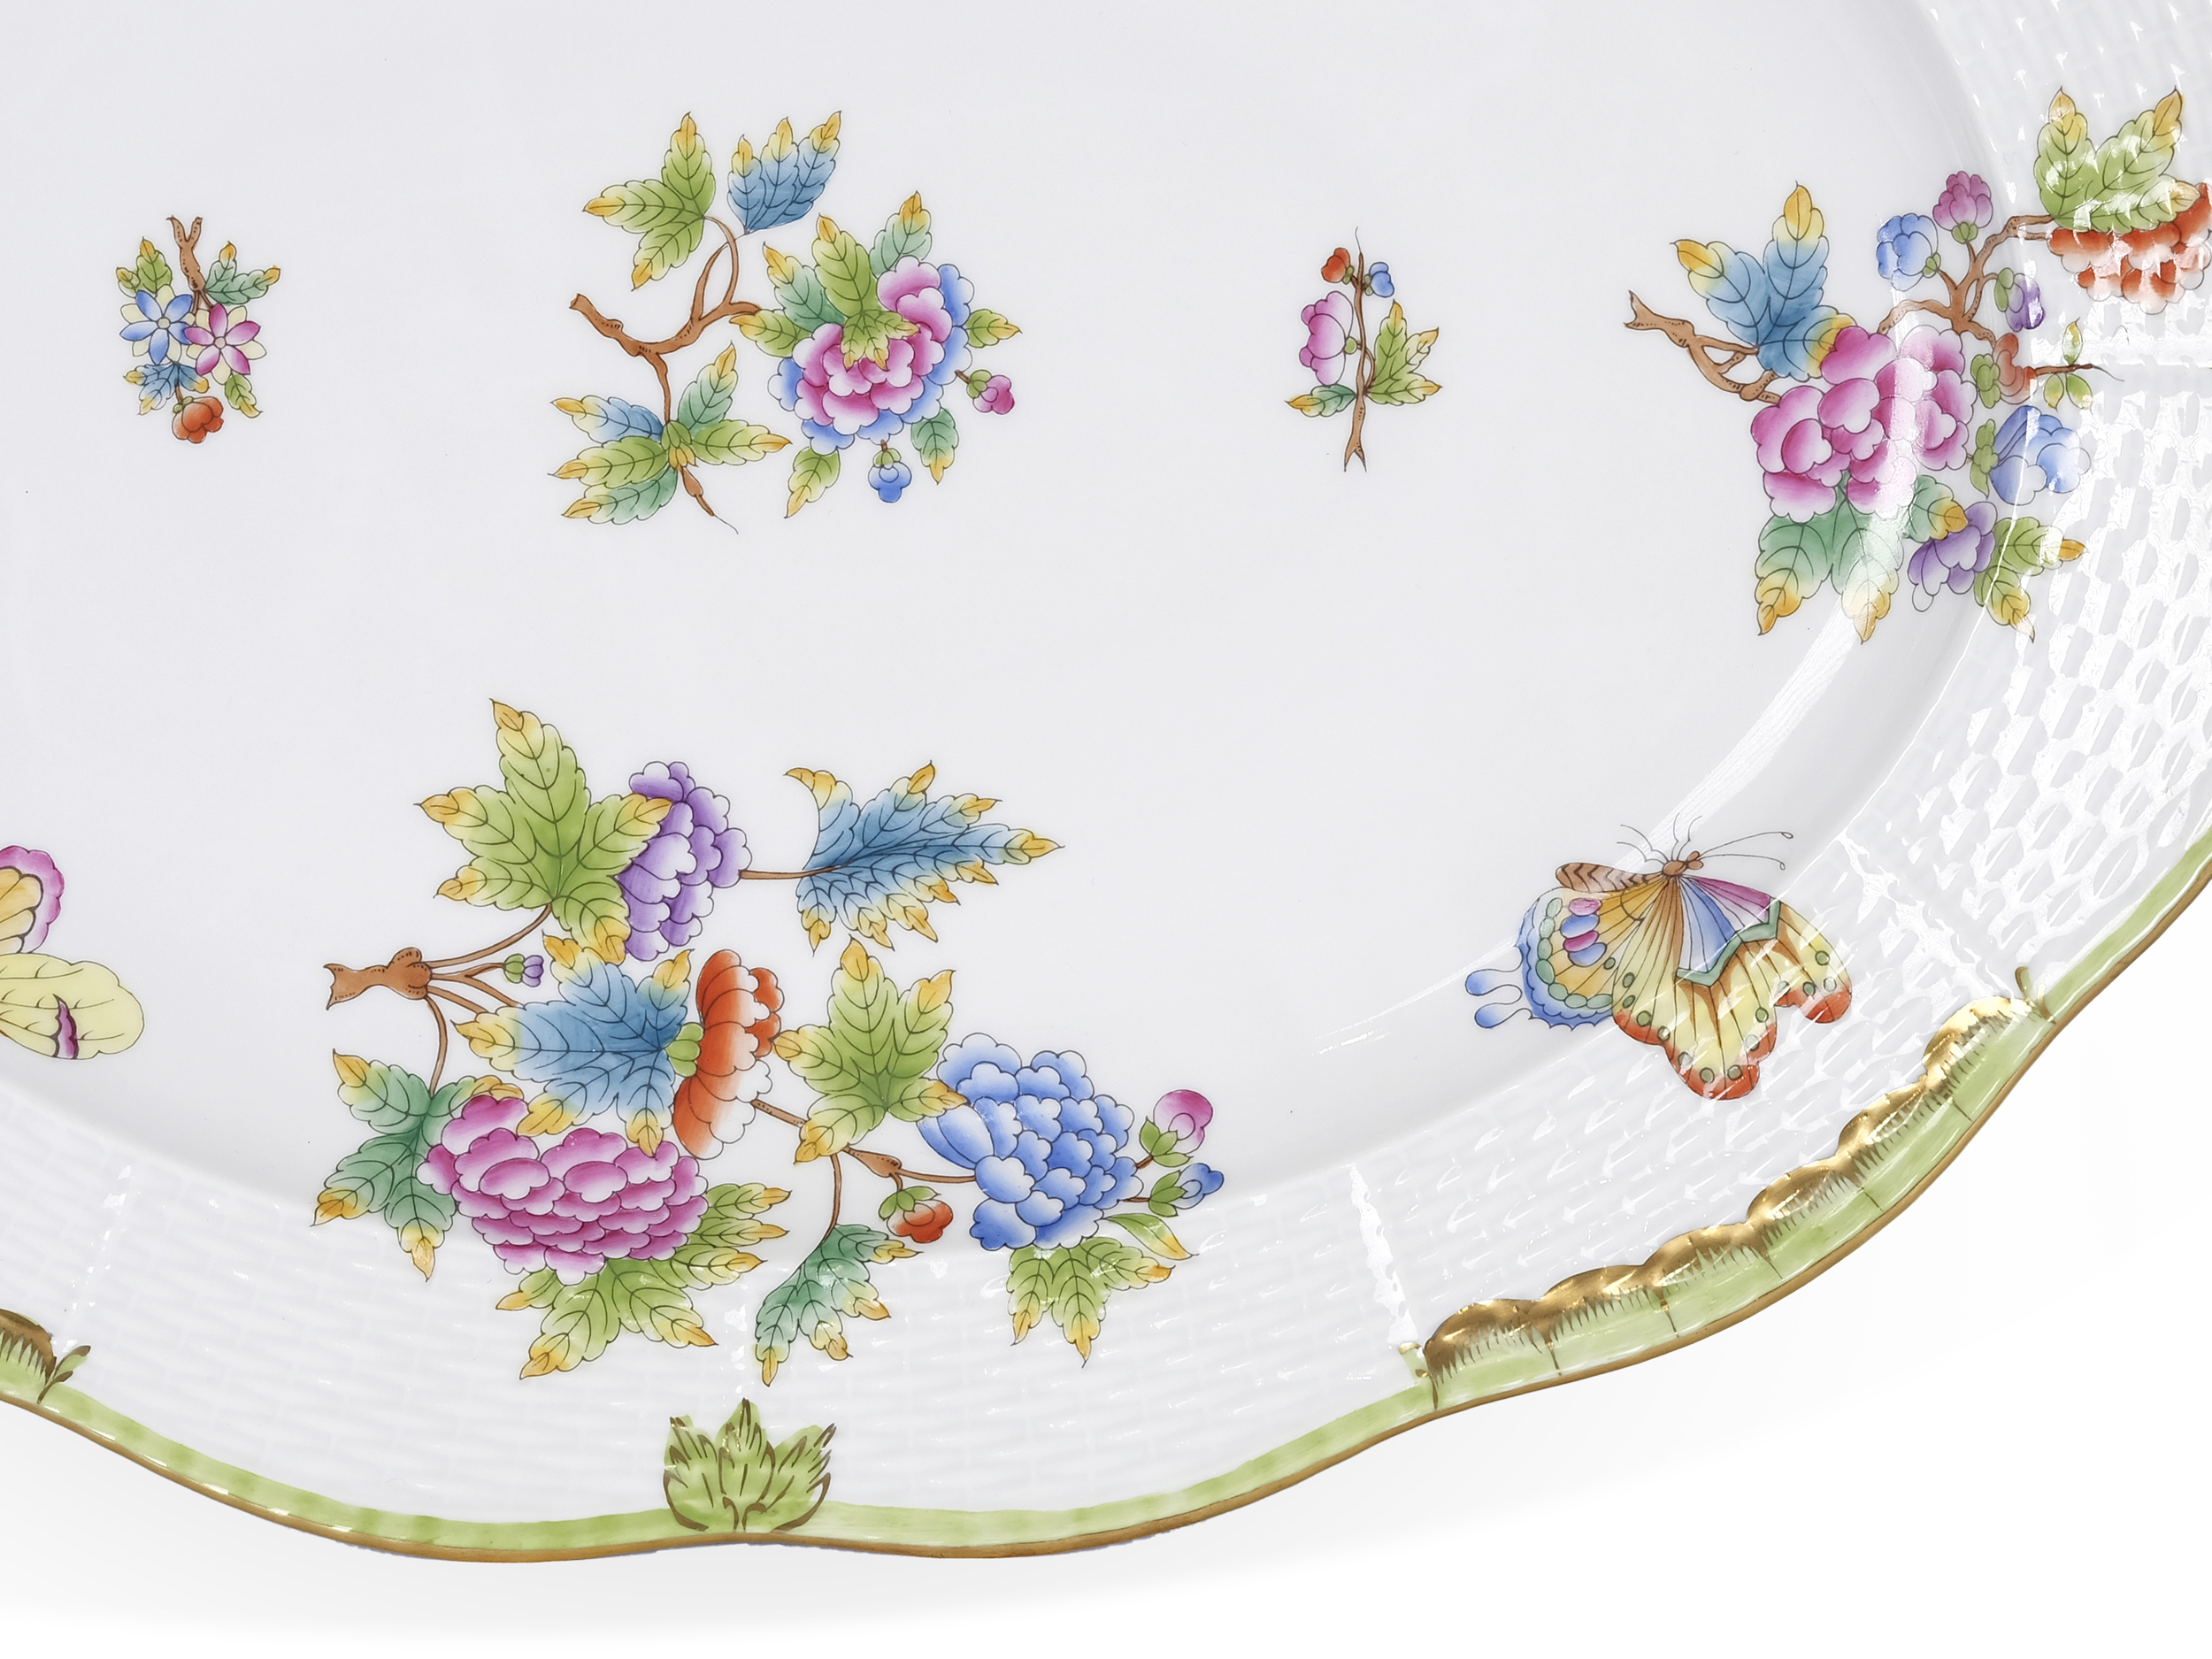 Dinner service for 6 persons, 25-piece, Herend, Victoria decor - Image 5 of 10